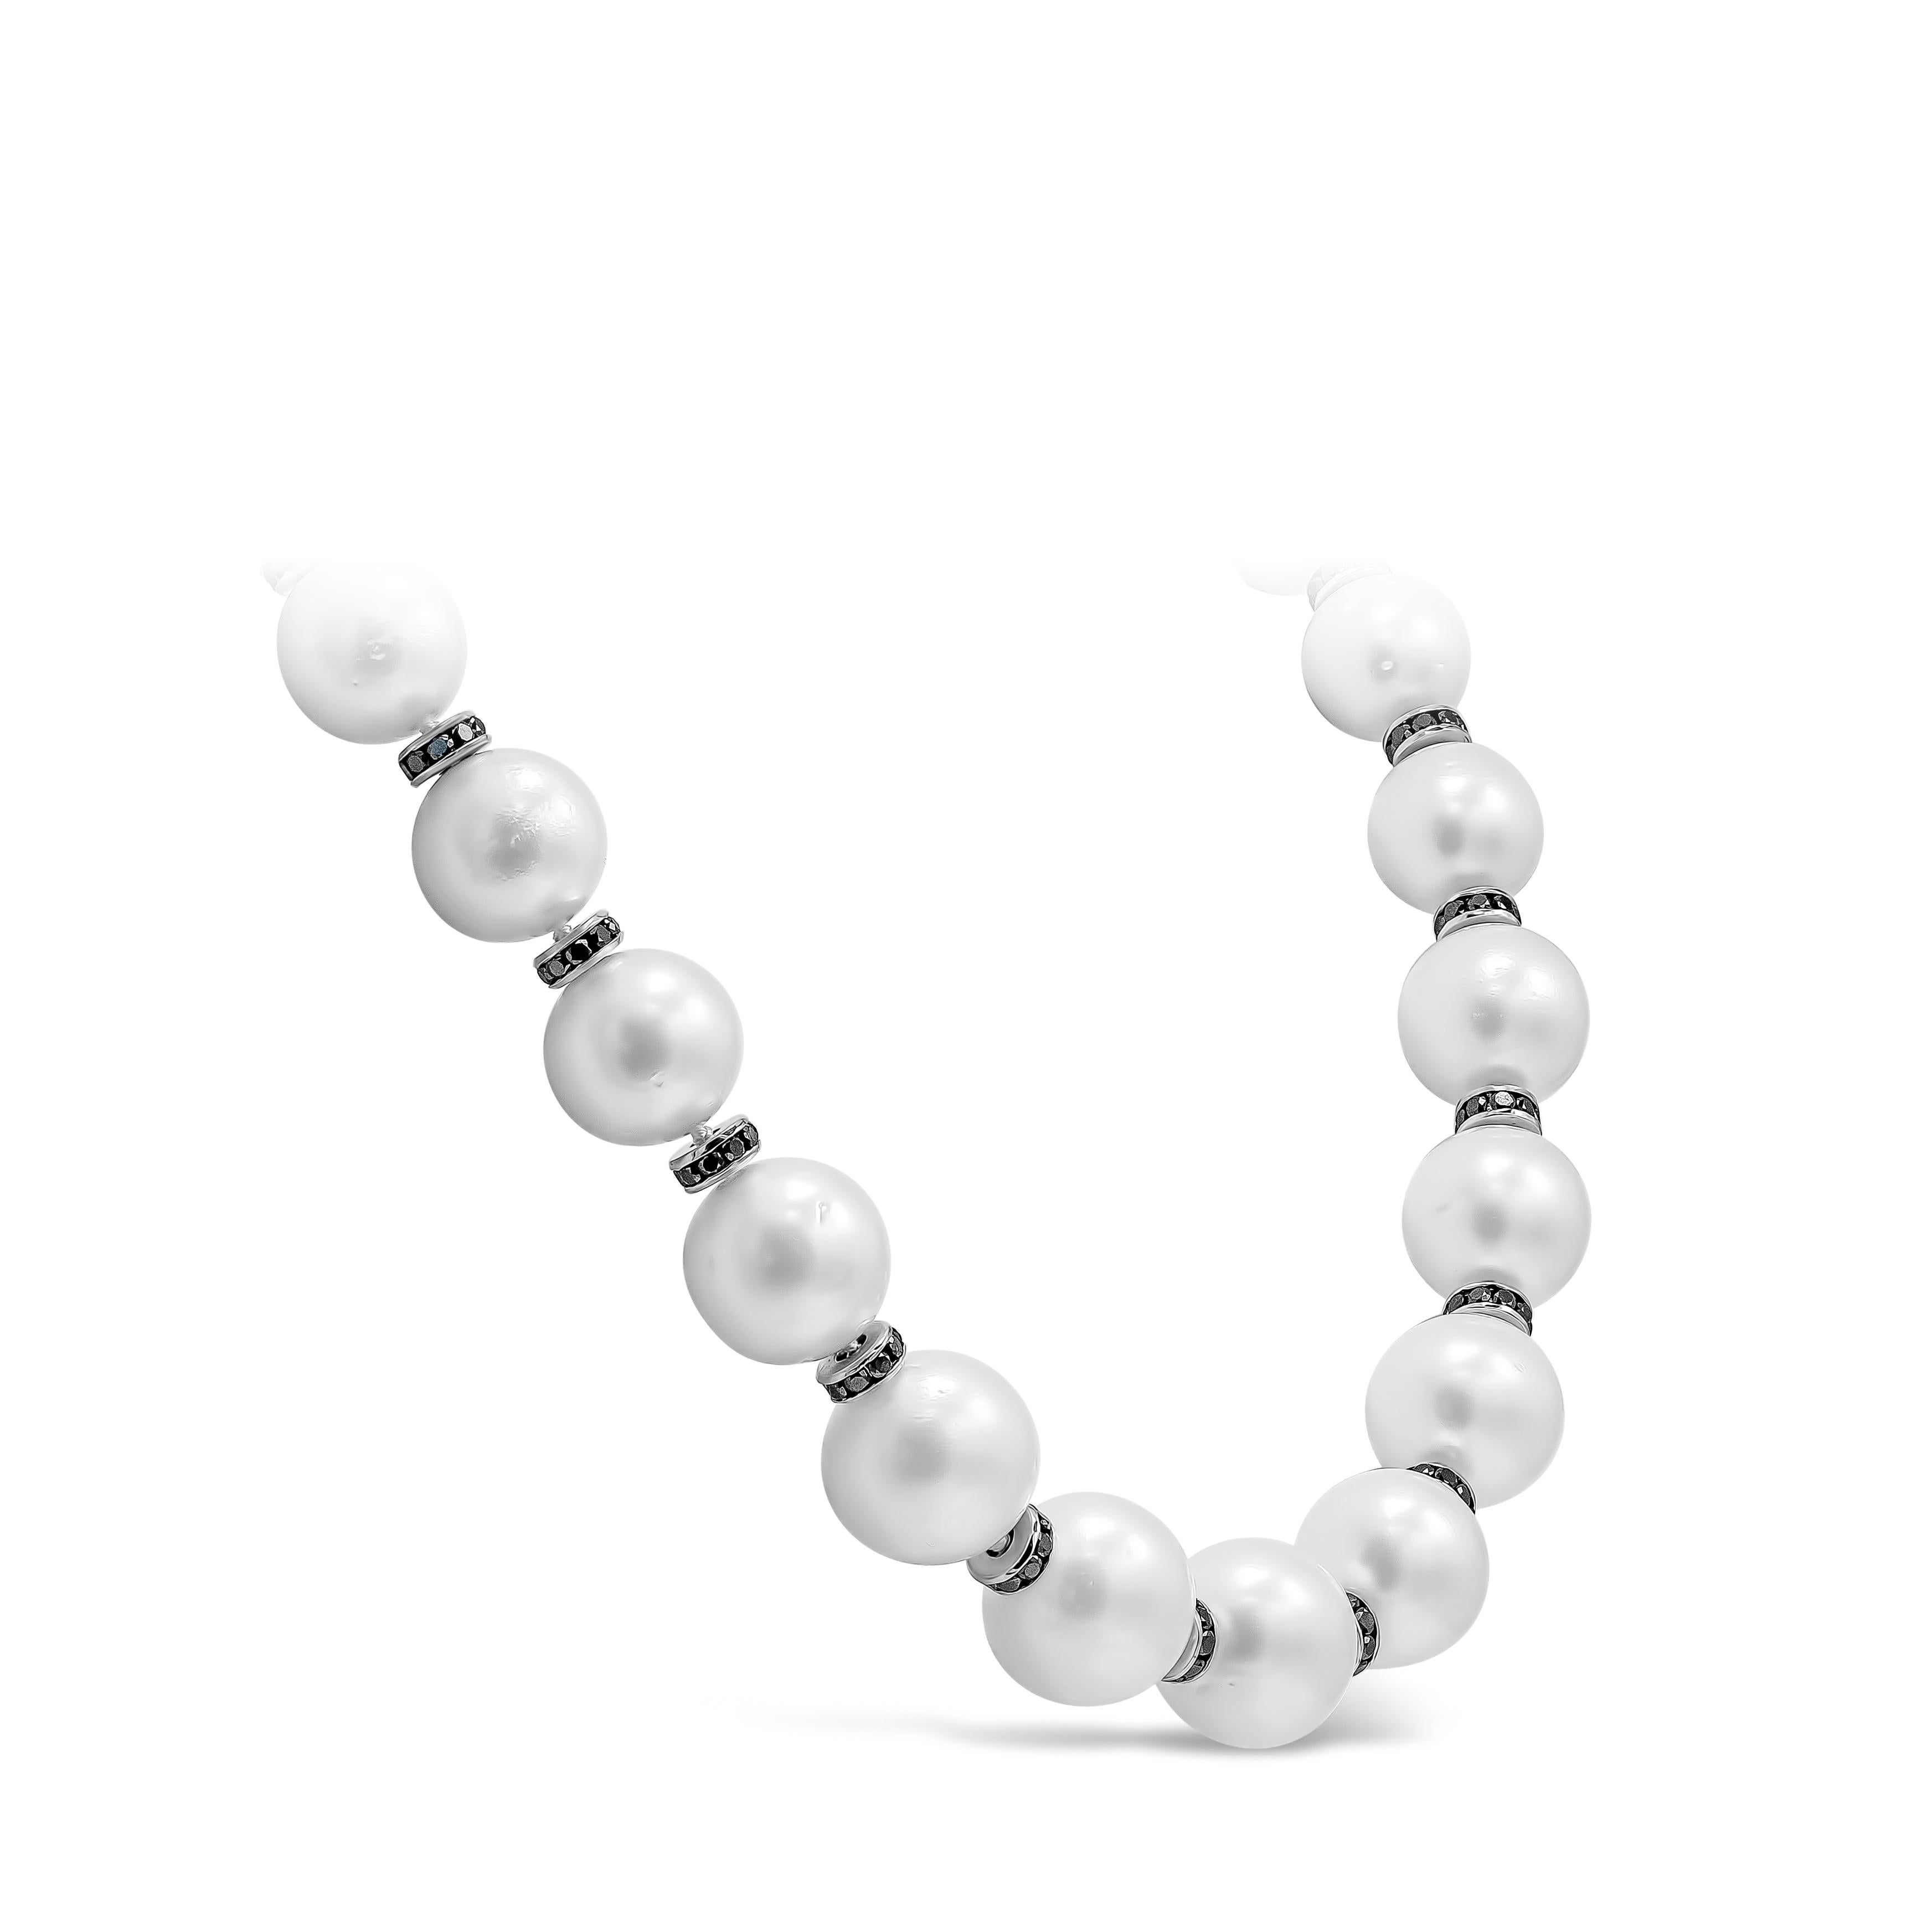 A beautiful and brilliant necklace showcasing a row of 28 graduating natural white pearls, spaced by 14K white gold rondelles set with round black diamonds. 256 pieces of black diamonds weigh 11.02 carats total. Pearls are approximately 13mm-16.30mm